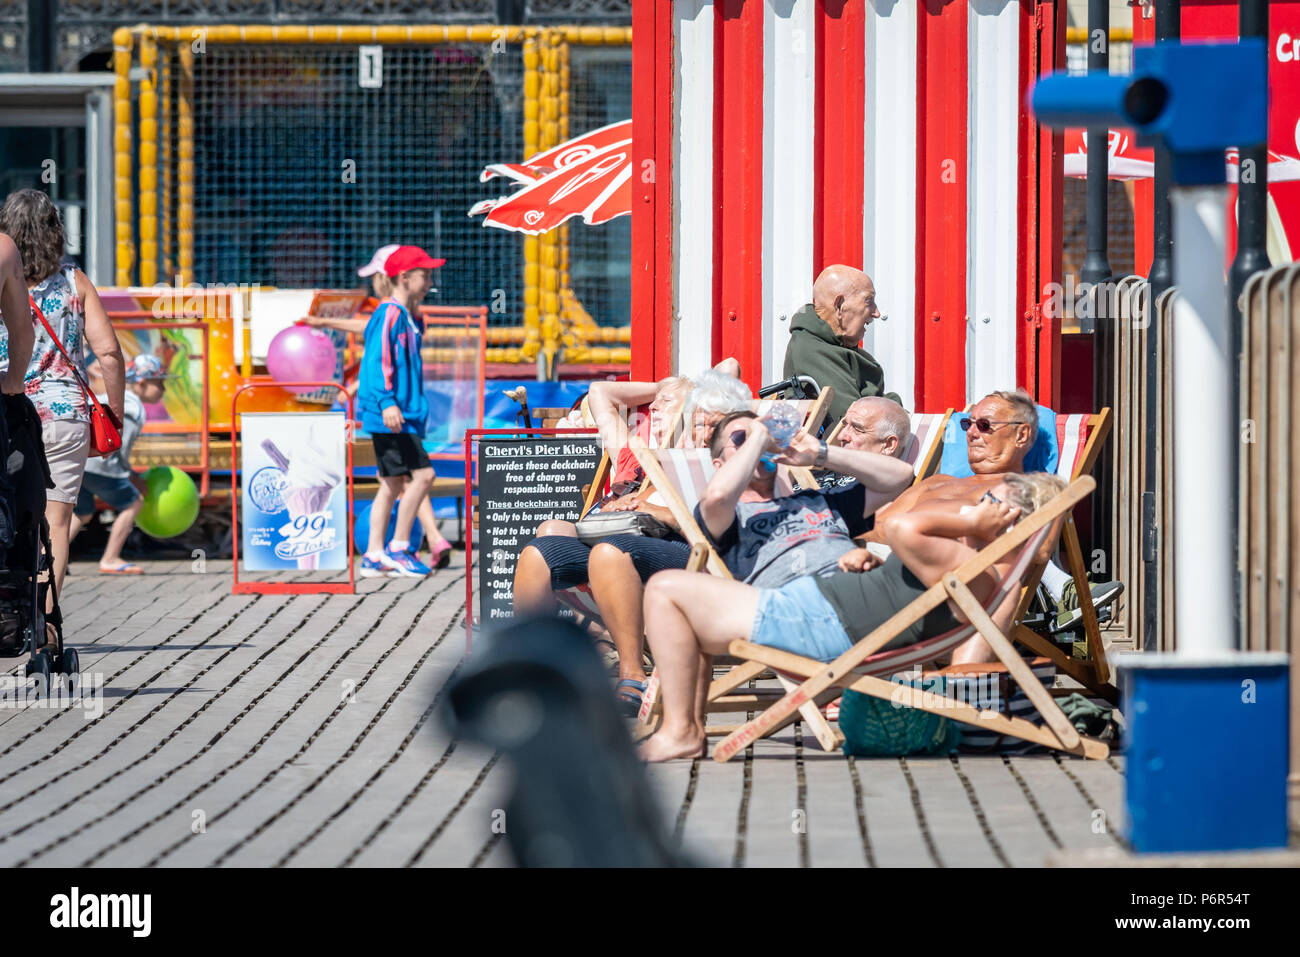 Skegness, UK. 2nd July 2018. On Skegness Pier a group of old age pensioners sit in their deck chairs and enjoy the hot weather, bright sunshine, and raising temperatures as they relax and take it easy during the current heatwave that is hiting the whole of the UK. Credit: Steven Booth/Alamy Live News. Stock Photo